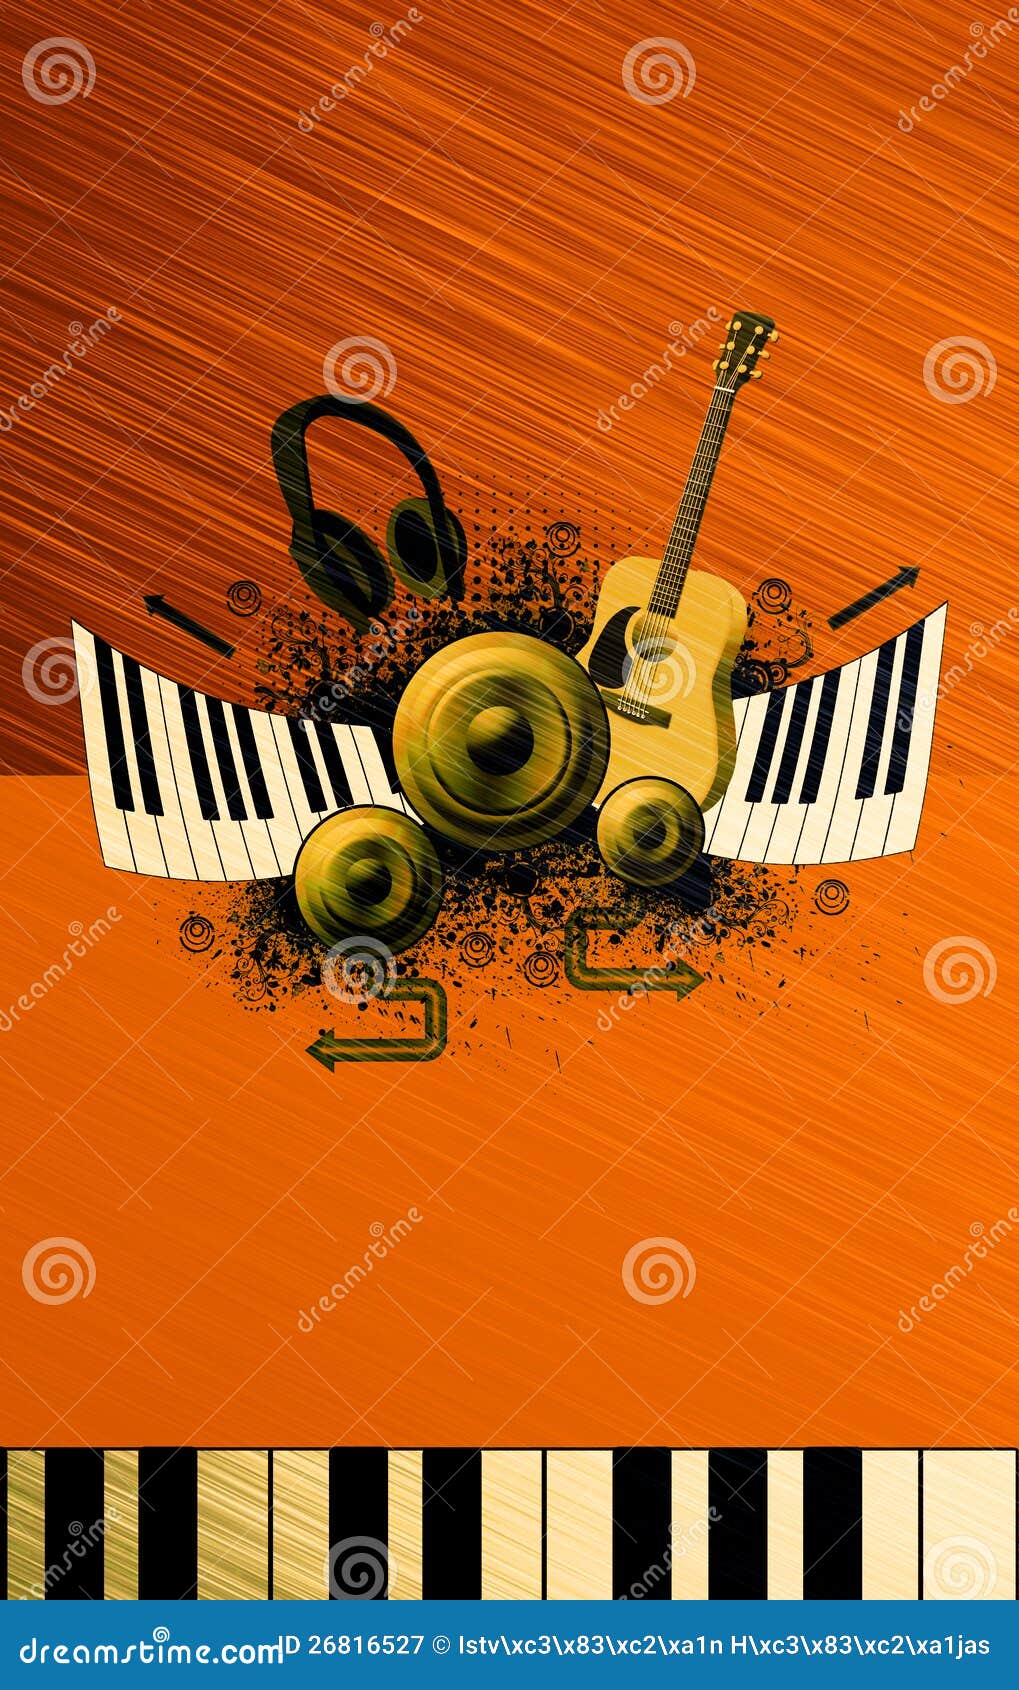 Music Poster Background Royalty Free Stock Photography - Image: 26816527